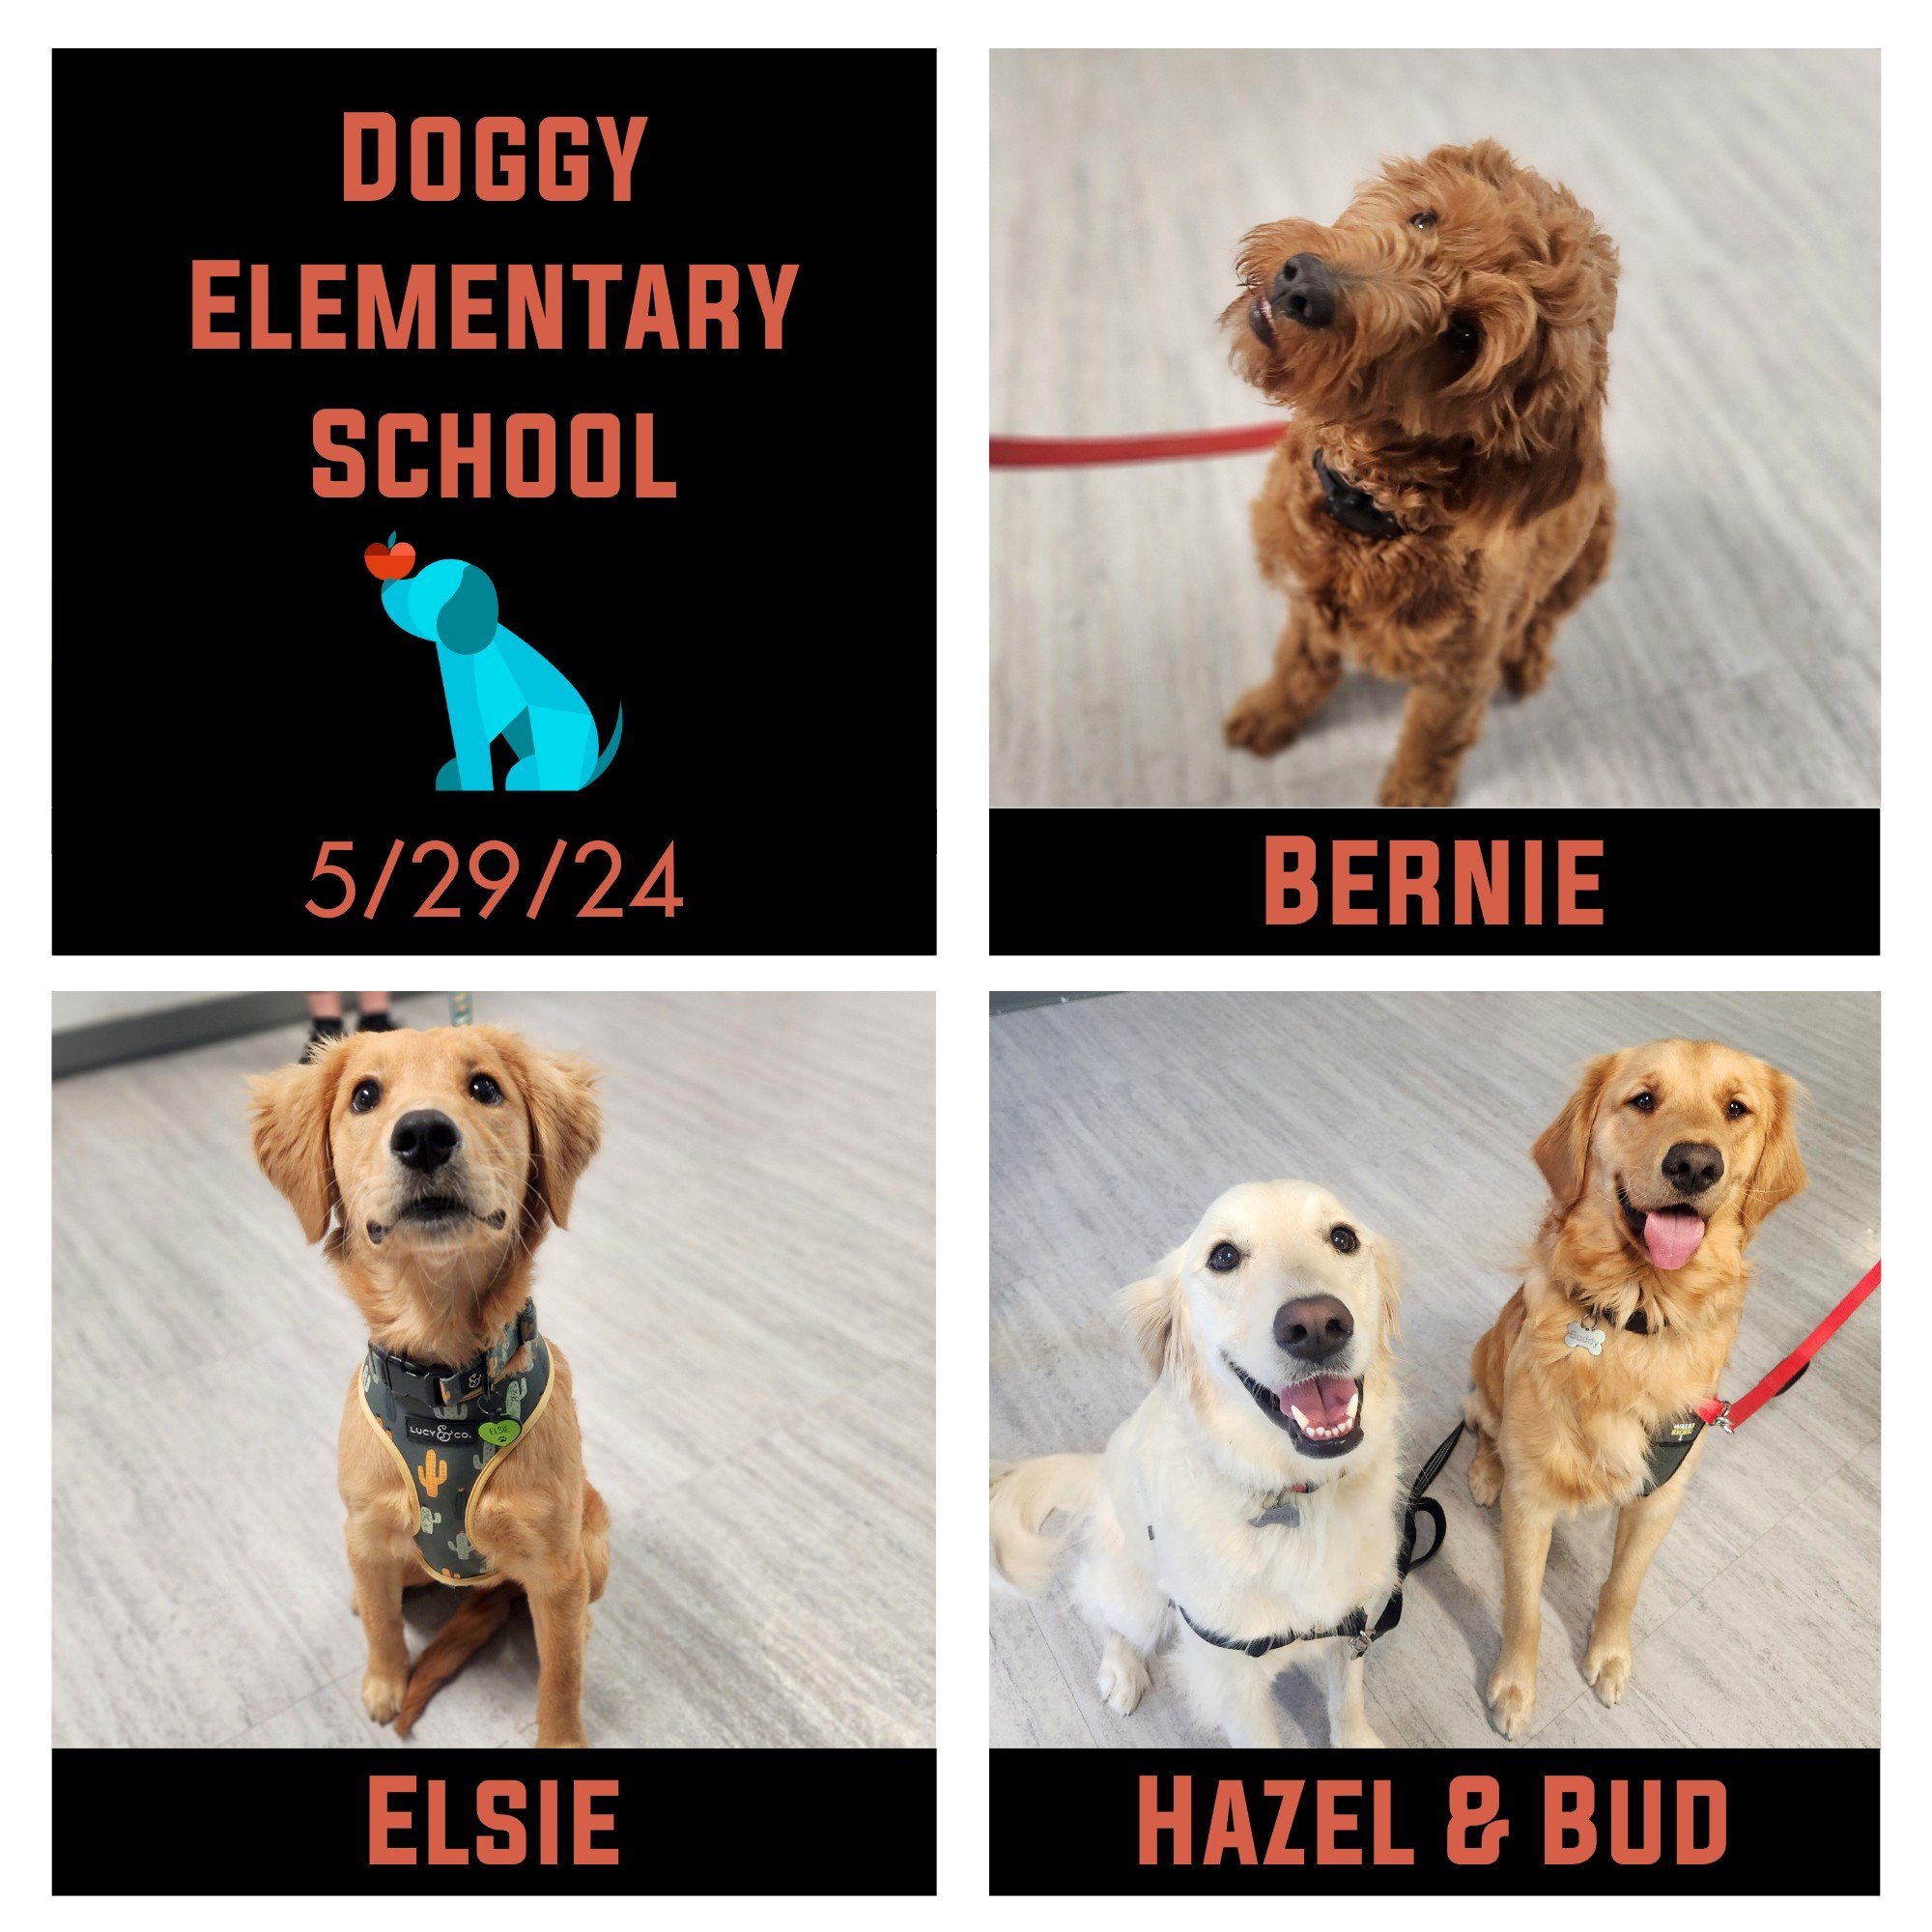 Bernie, Elsie, Hazel &amp; Bud (who are doggy sibs), &amp; Maple (who homeschooled for grad week) graduated their Doggy Elementary School at Prairie Pawz this week! We had so much fun with this happy group of pups! Their pawrents were so excellent at